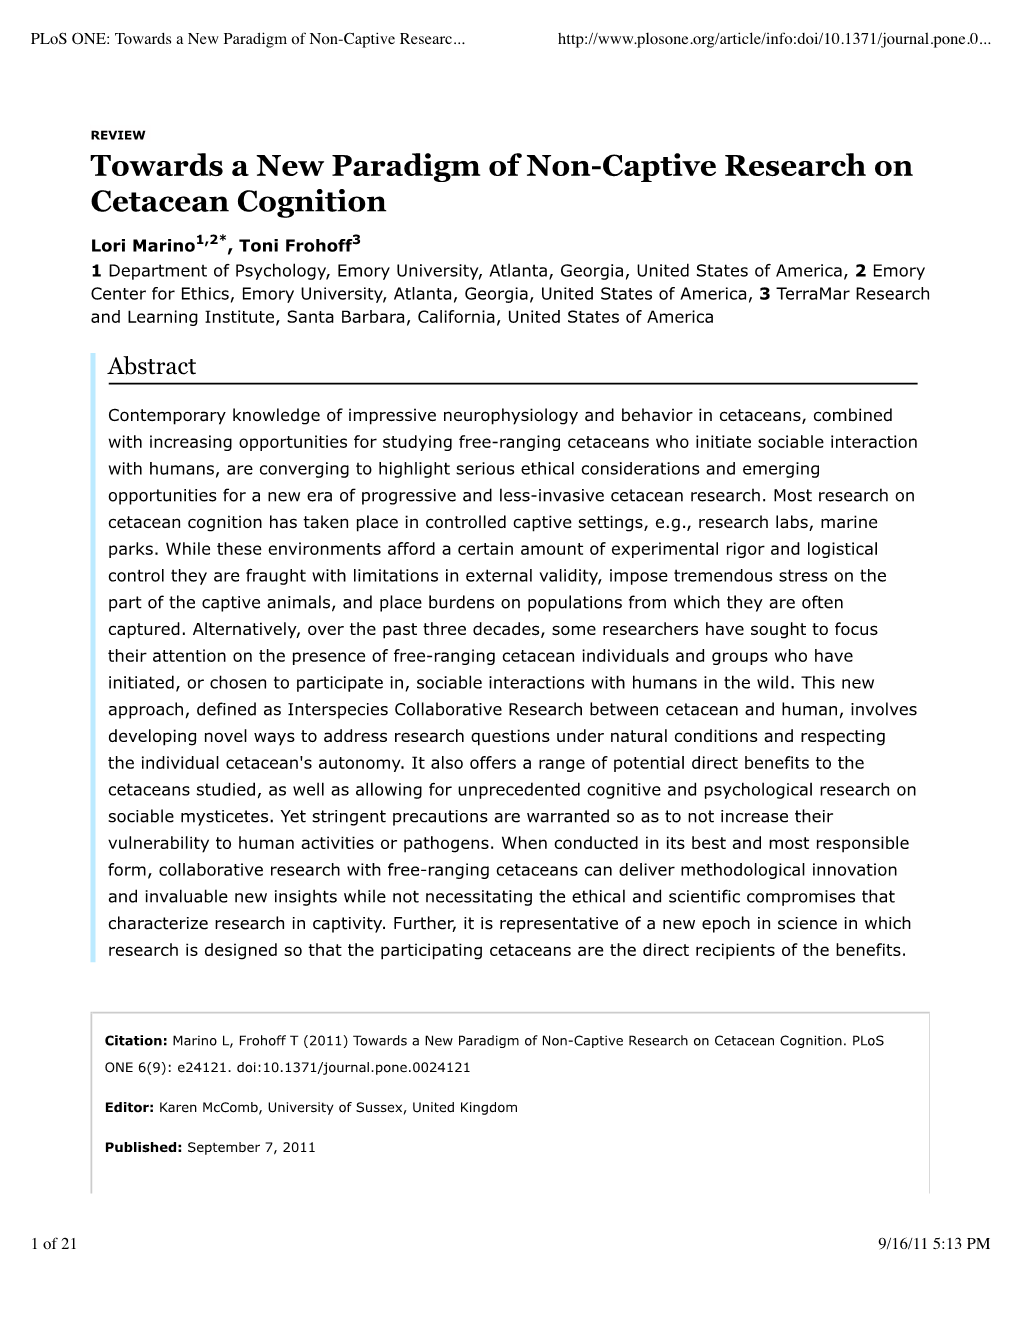 Towards a New Paradigm of Non-Captive Research on Cetacean Cognition